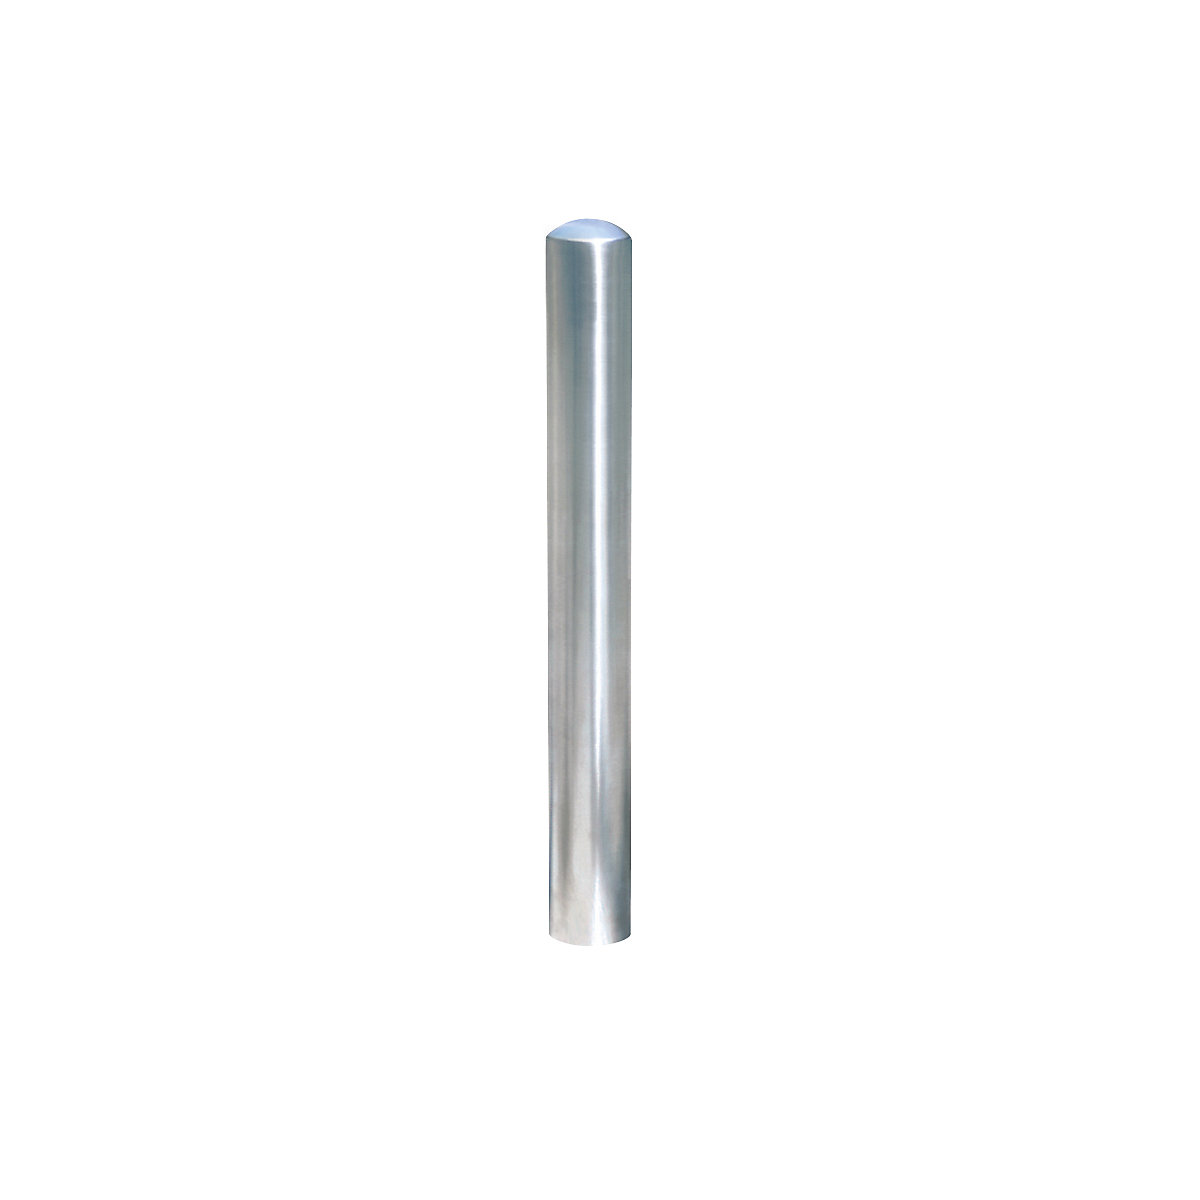 Stainless steel bollard, for concreting in, Ø 76 mm-3